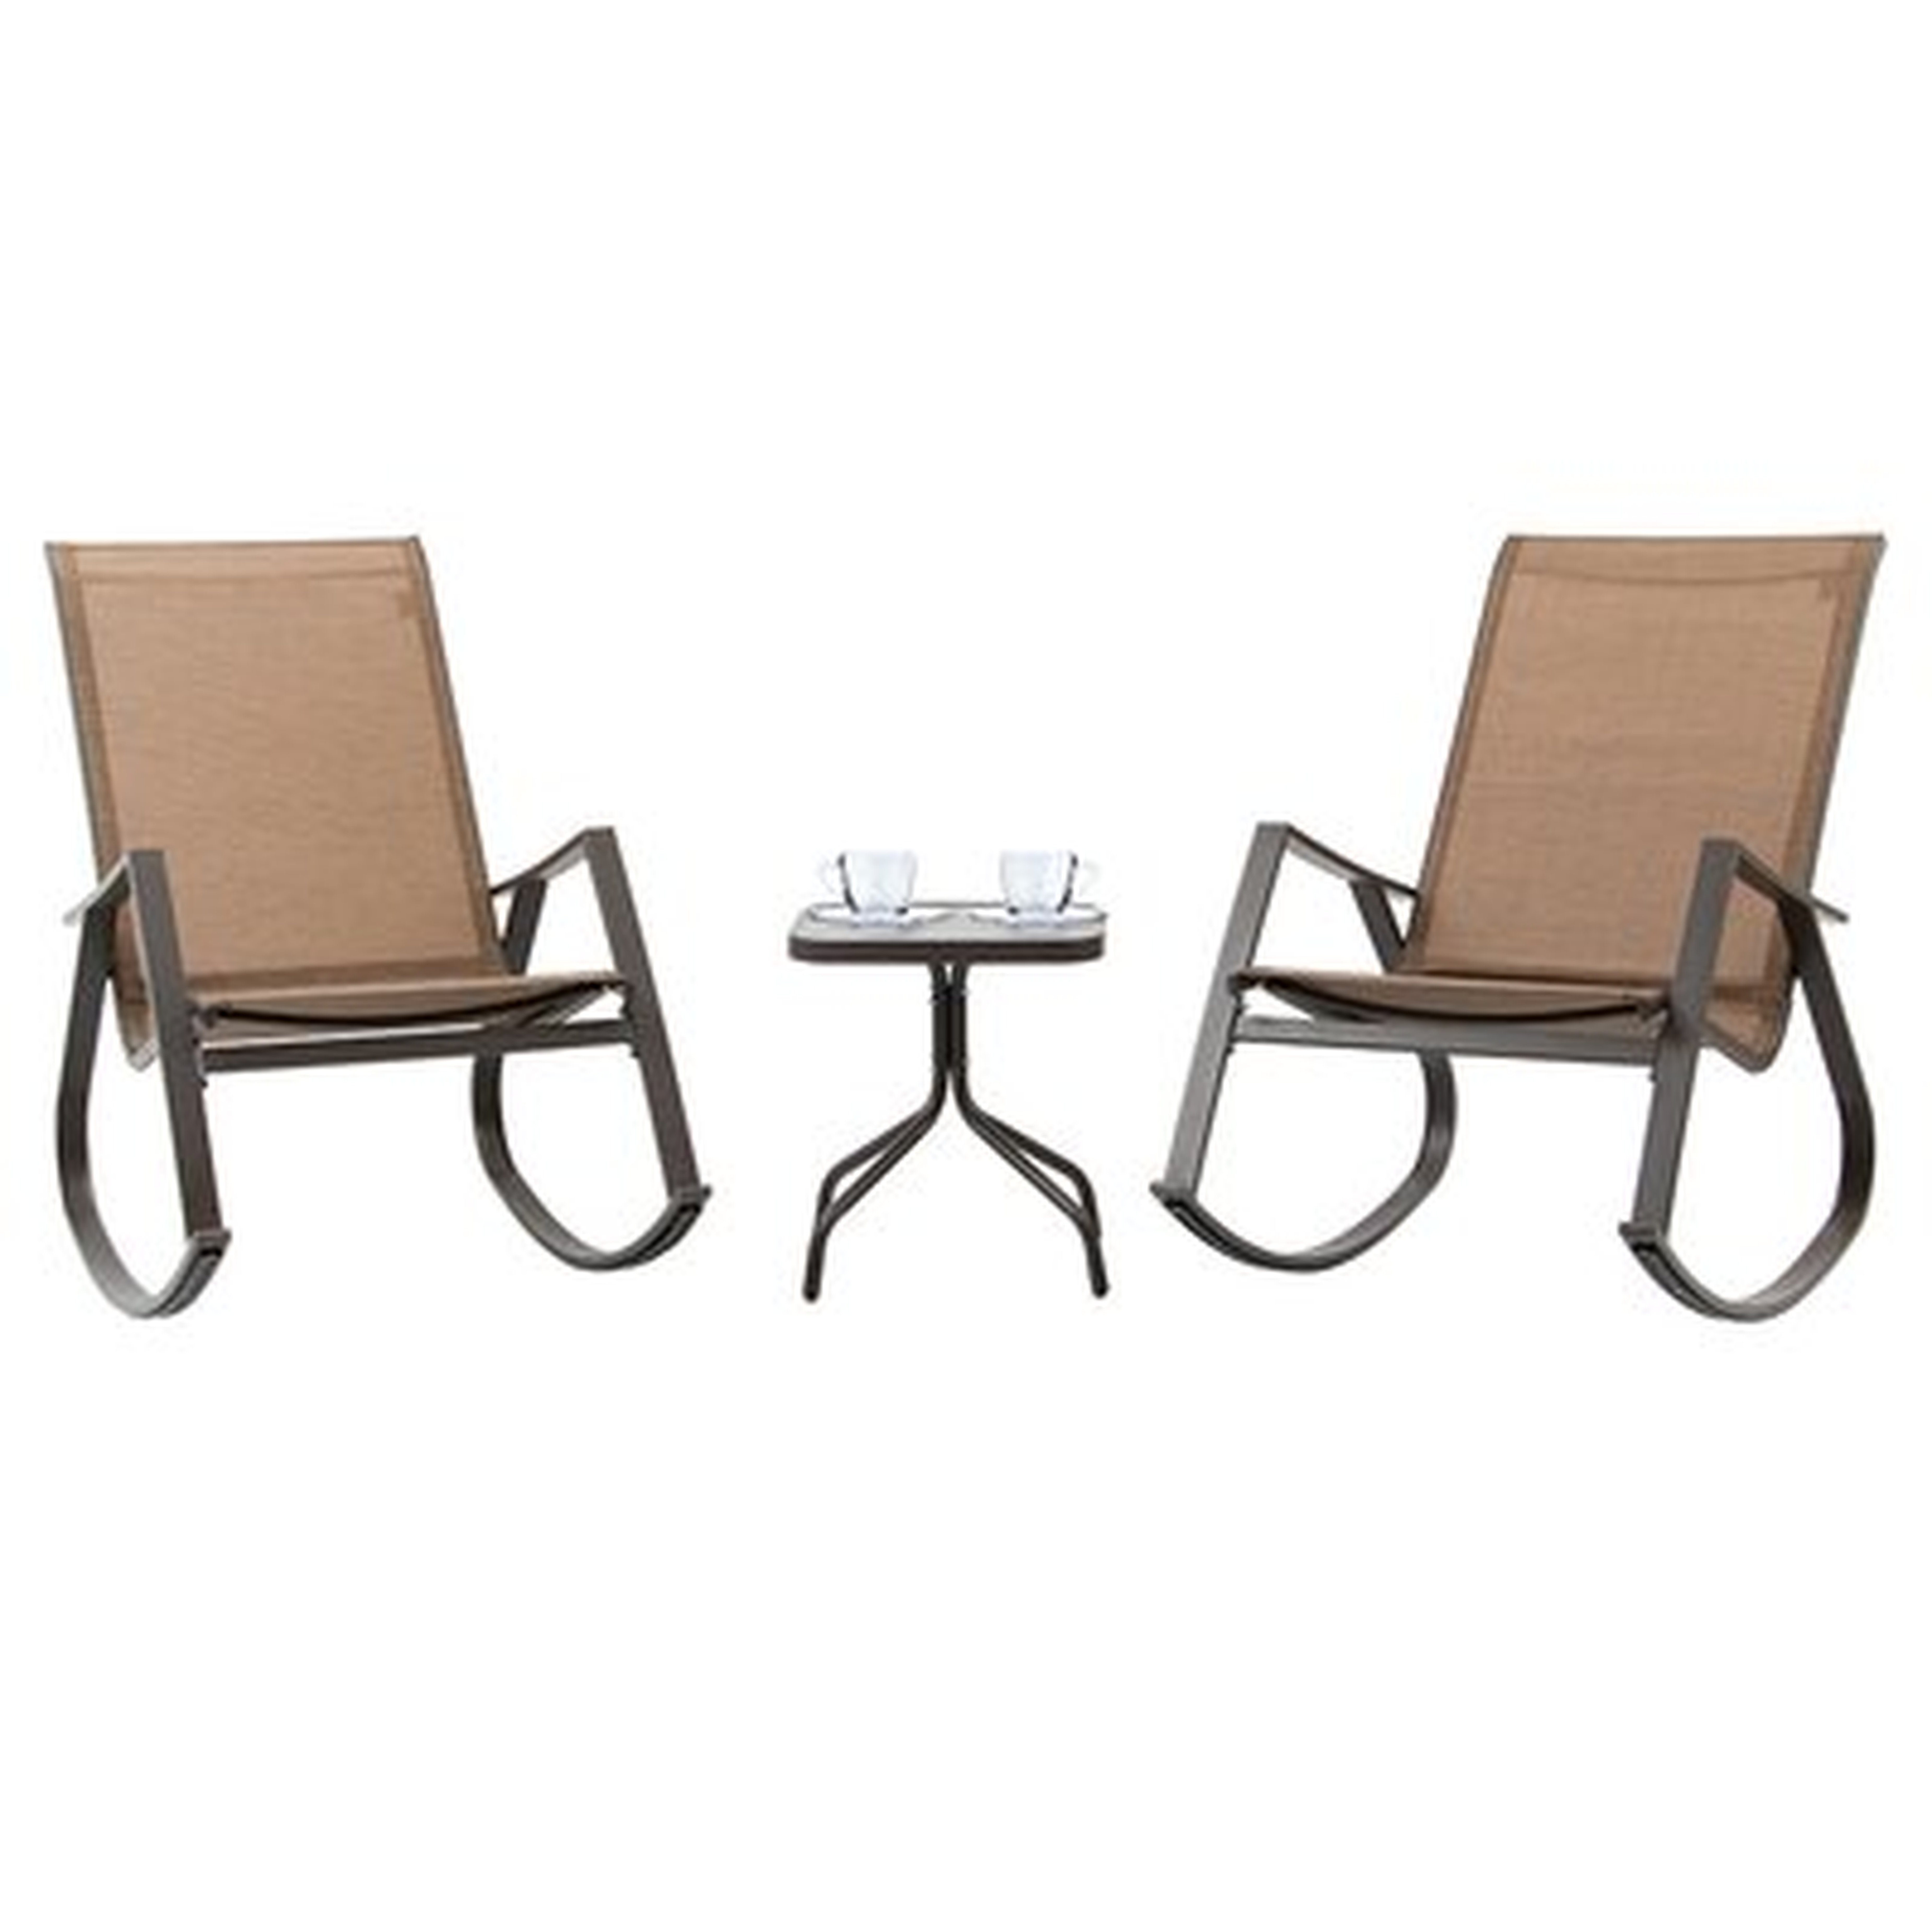 3 Pcs Patio Bistro Set, Rocking Chairs & Tempered Class Coffee Table, Outdoor Recliner Chairs All-weather Relaxation Set For Lawn Camping Beach Poolside (brown) - Wayfair